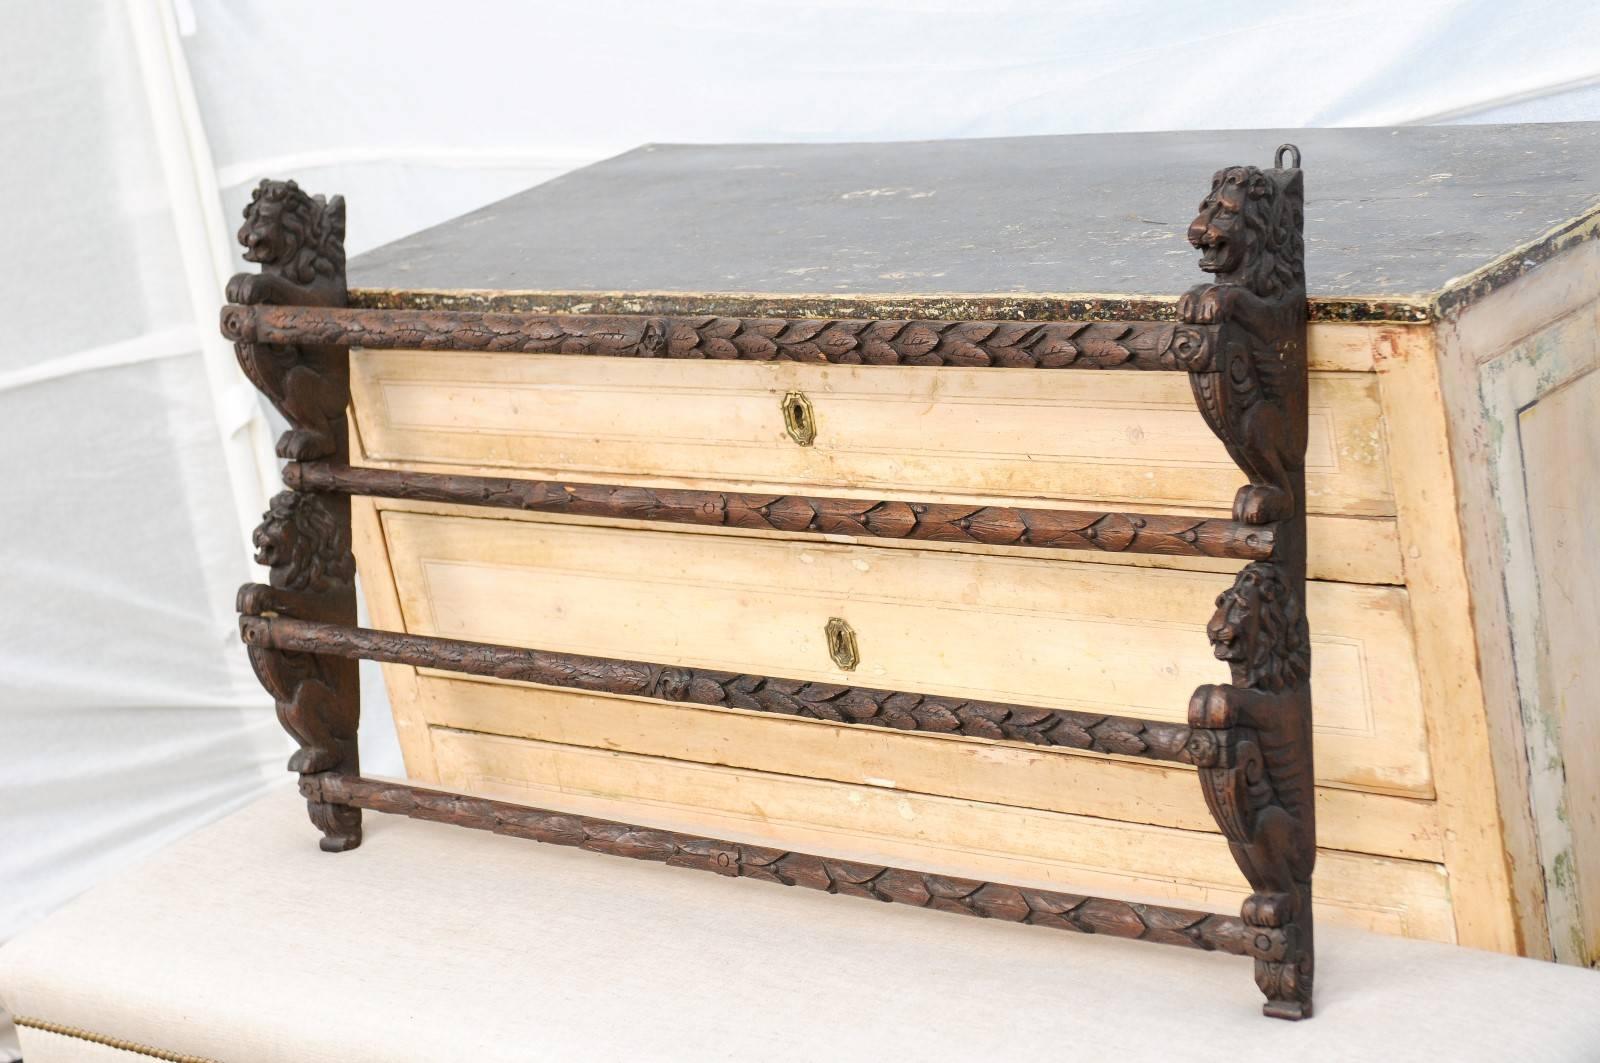 An English oak rack with carved lions from the late 19th century. This English wooden rack is made of four rows of carved beams, secured on both sides with carved lions with volutes in the front. Carefully guarding your possessions, the lions have